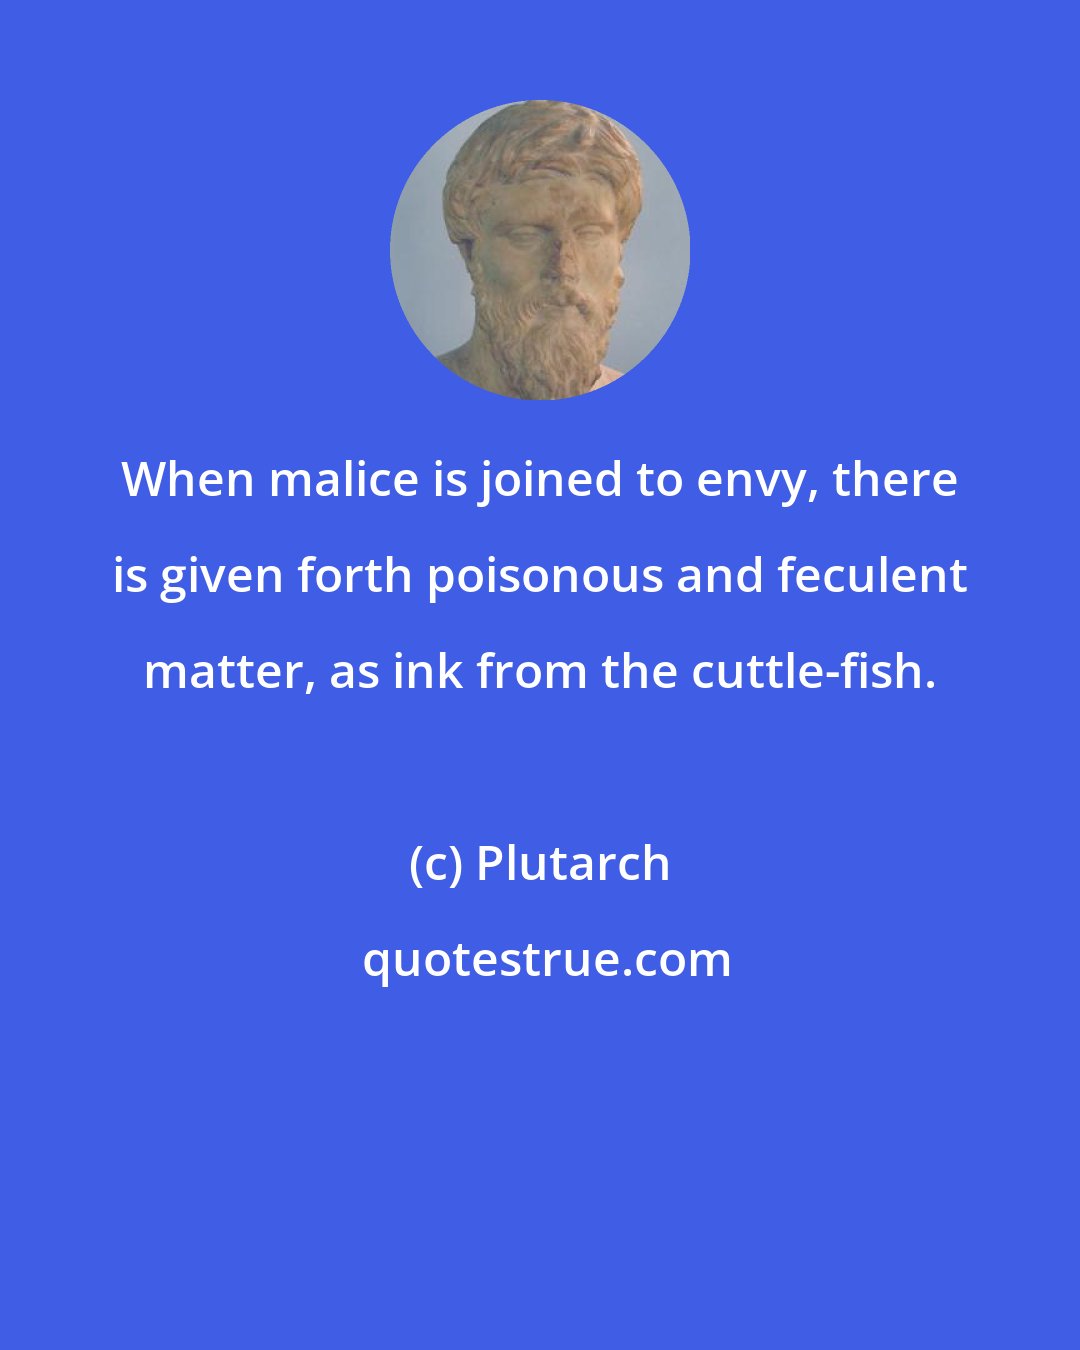 Plutarch: When malice is joined to envy, there is given forth poisonous and feculent matter, as ink from the cuttle-fish.